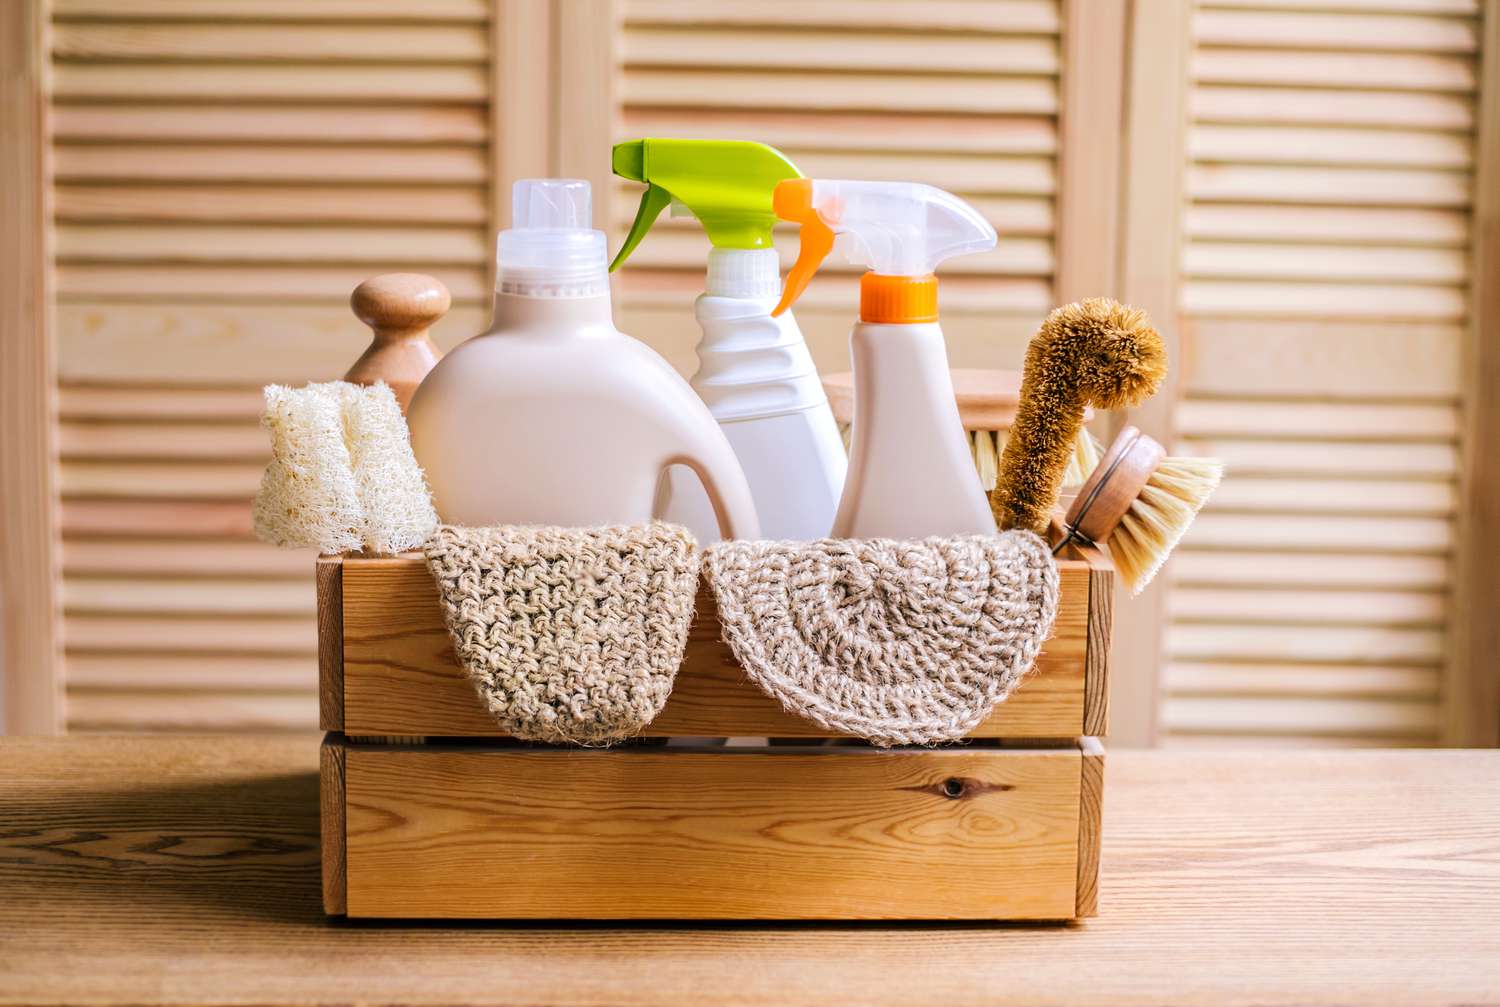 Cleaning supplies in a basket